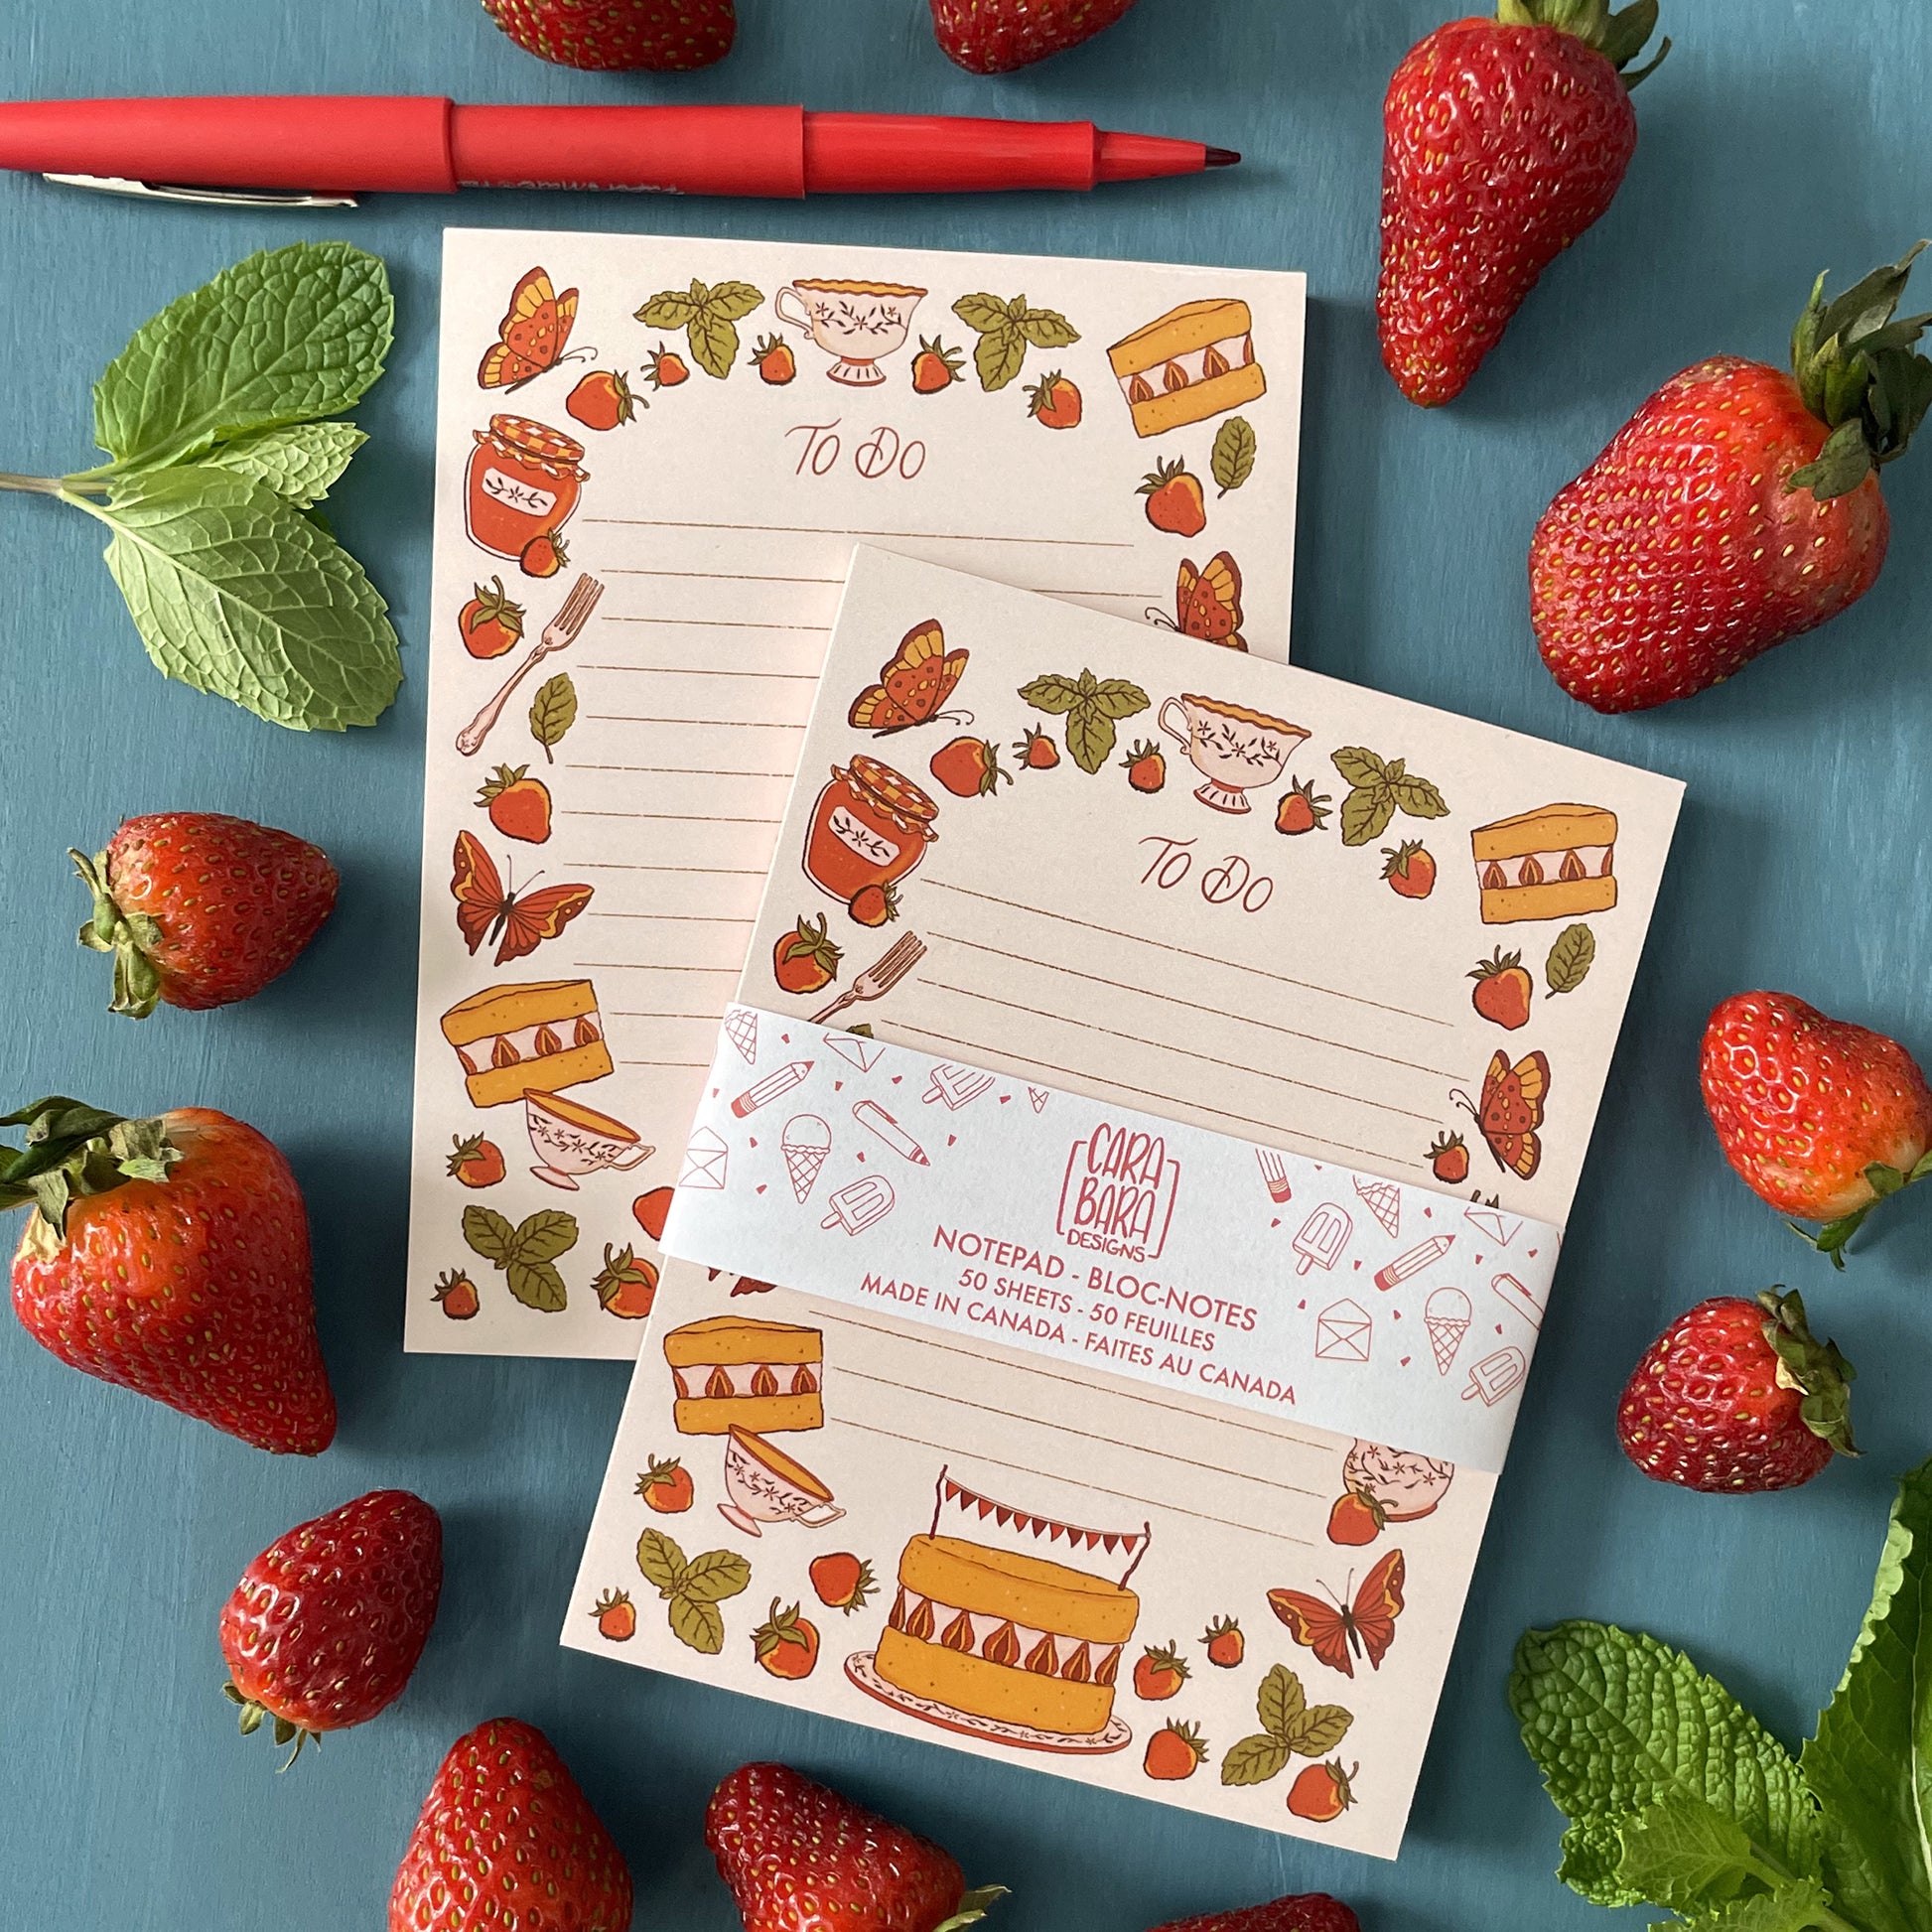 A pair of pink to-do lined cottagecore notepad feature illustrated strawberries, mint, cake, tea, and butterflies. The front notepad is packaged with a belly band featuring the Carabara Designs logo and indicating that it is 50 pages and made in Canada. The notepads are surrounded by strawberries, mint leaves, and a red pen.